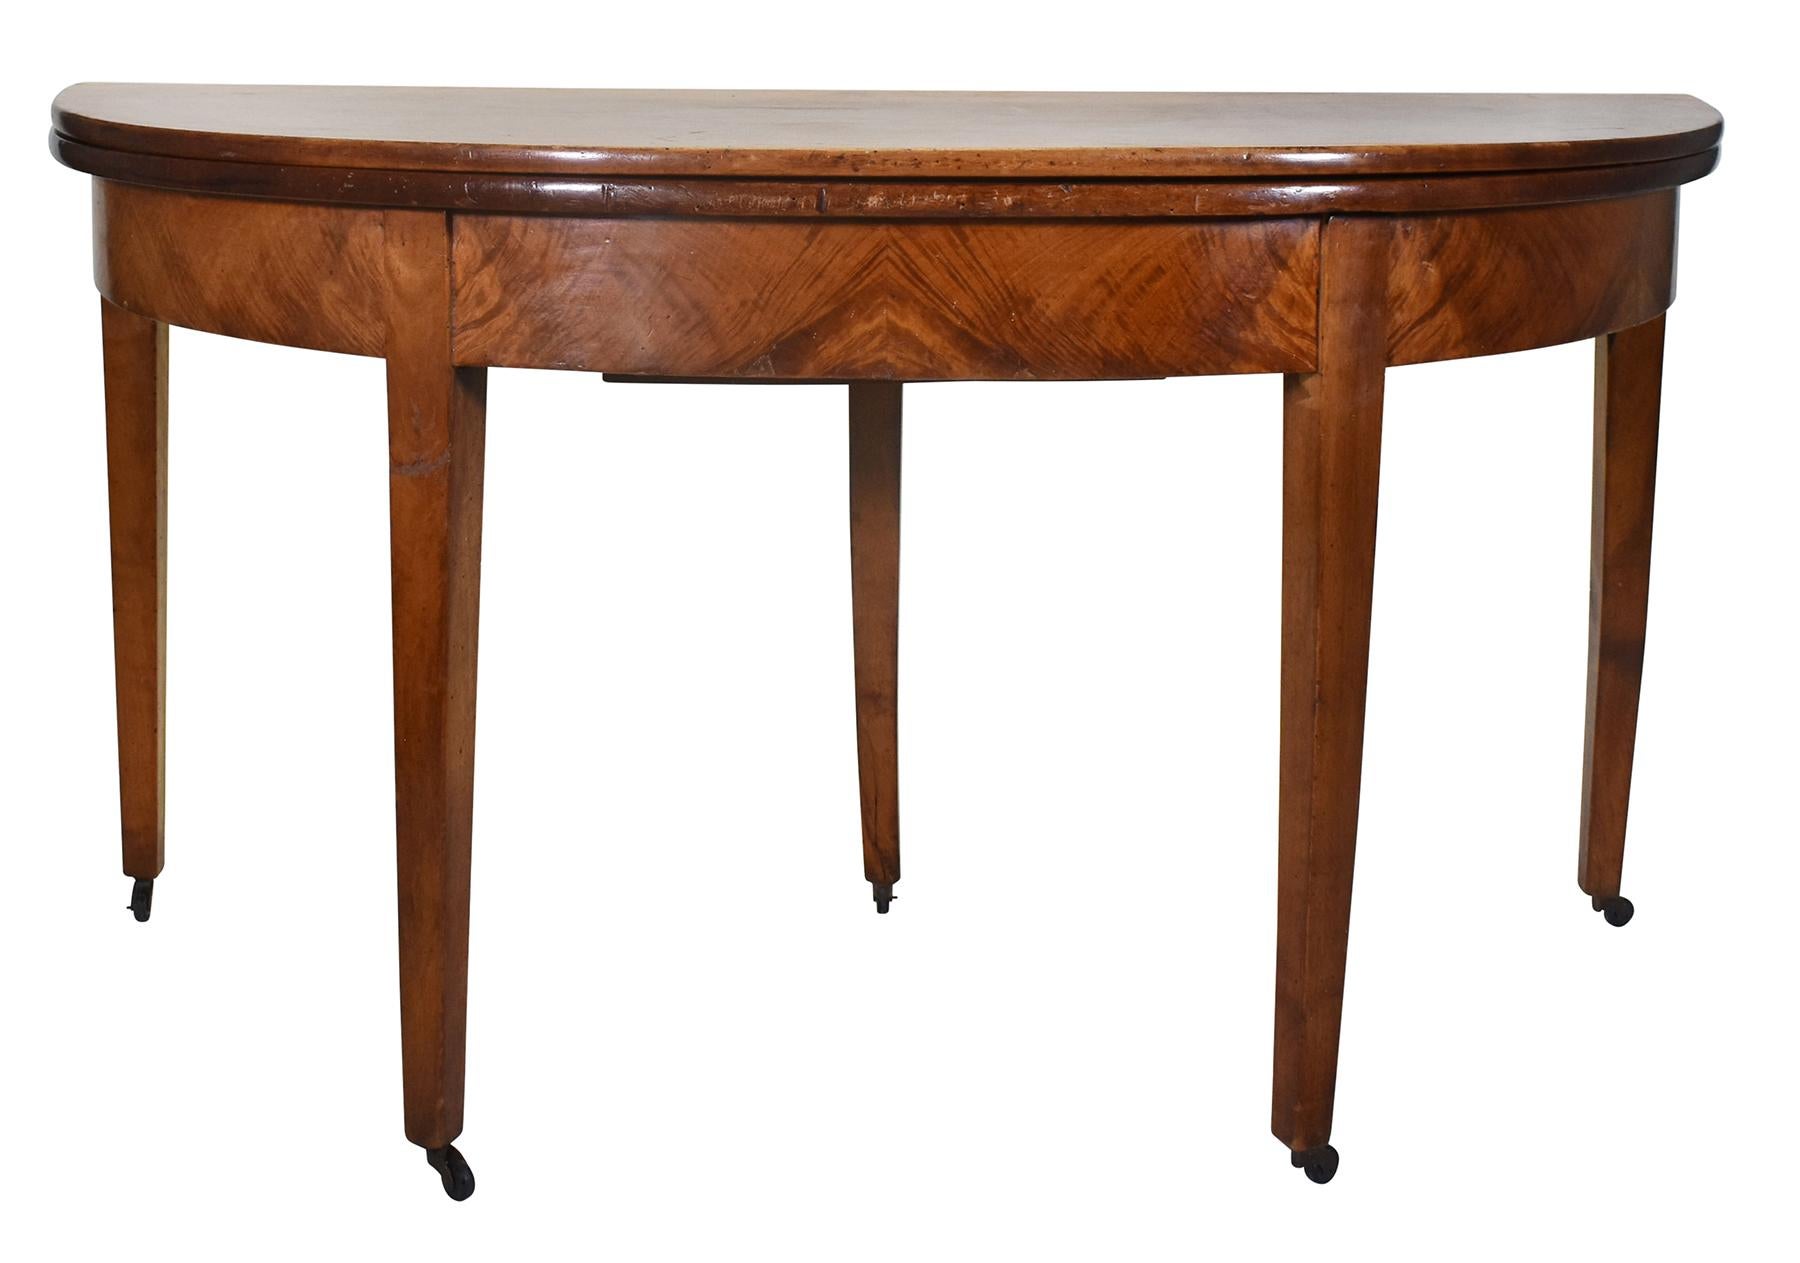 Classic Rich walnut table with straight tapering legs, brass casters, and striking wood grain of apron. The table can be used as a demilune against a wall or open the top to use as an oval table.

Dimensions below are when closed.  

Dimensions when